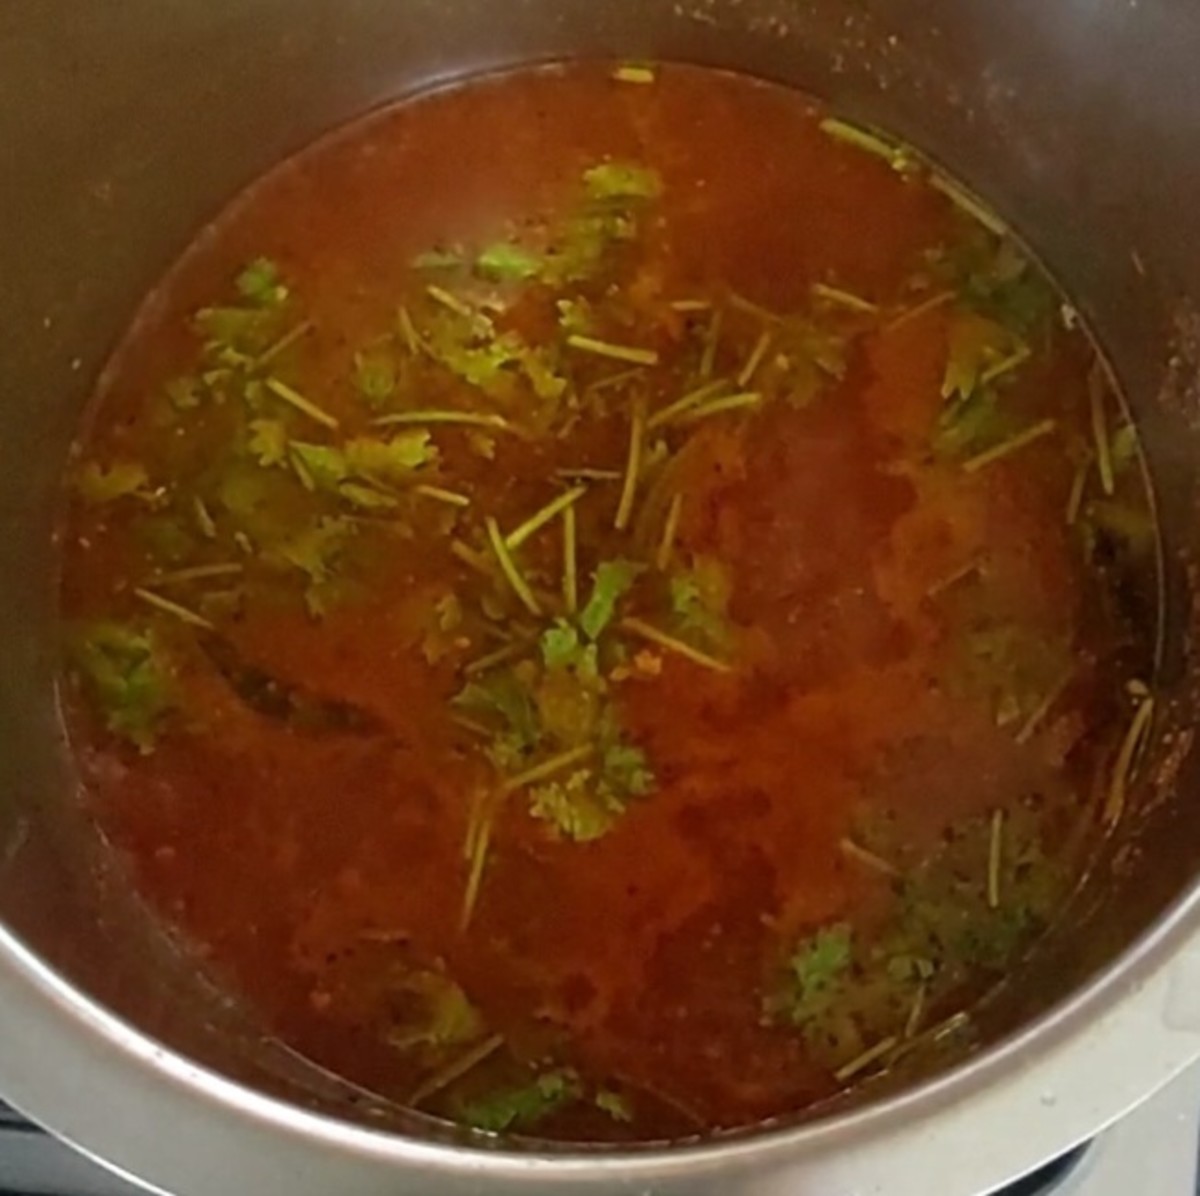 Add 1-2 sprigs chopped coriander leaves and mix well. Let it comes to a boil and then switch off the flame.